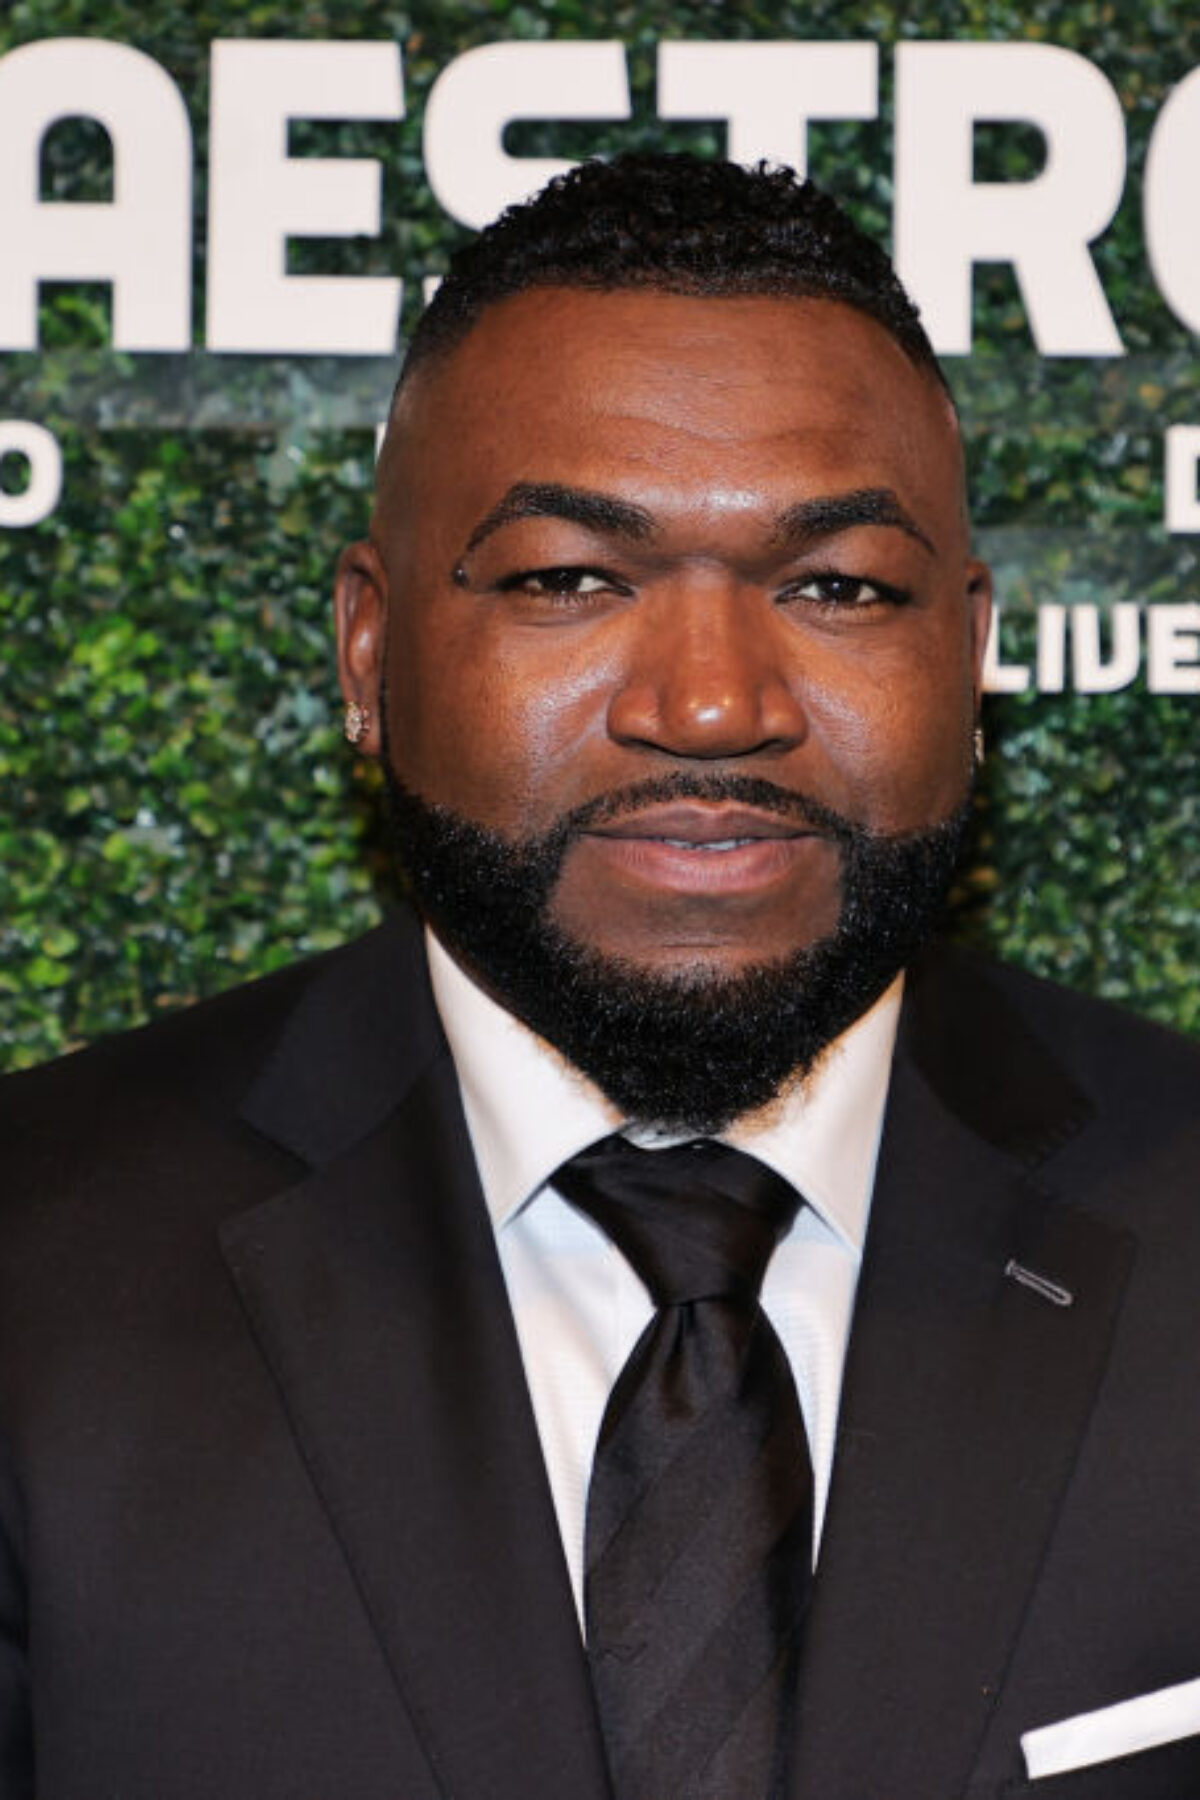 NEW YORK, NEW YORK - DECEMBER 07: David Ortiz attends the 2021 Maestro Cares Gala at Cipriani Wall Street on December 7, 2021 in New York City. (Photo by Theo Wargo/Getty Images)